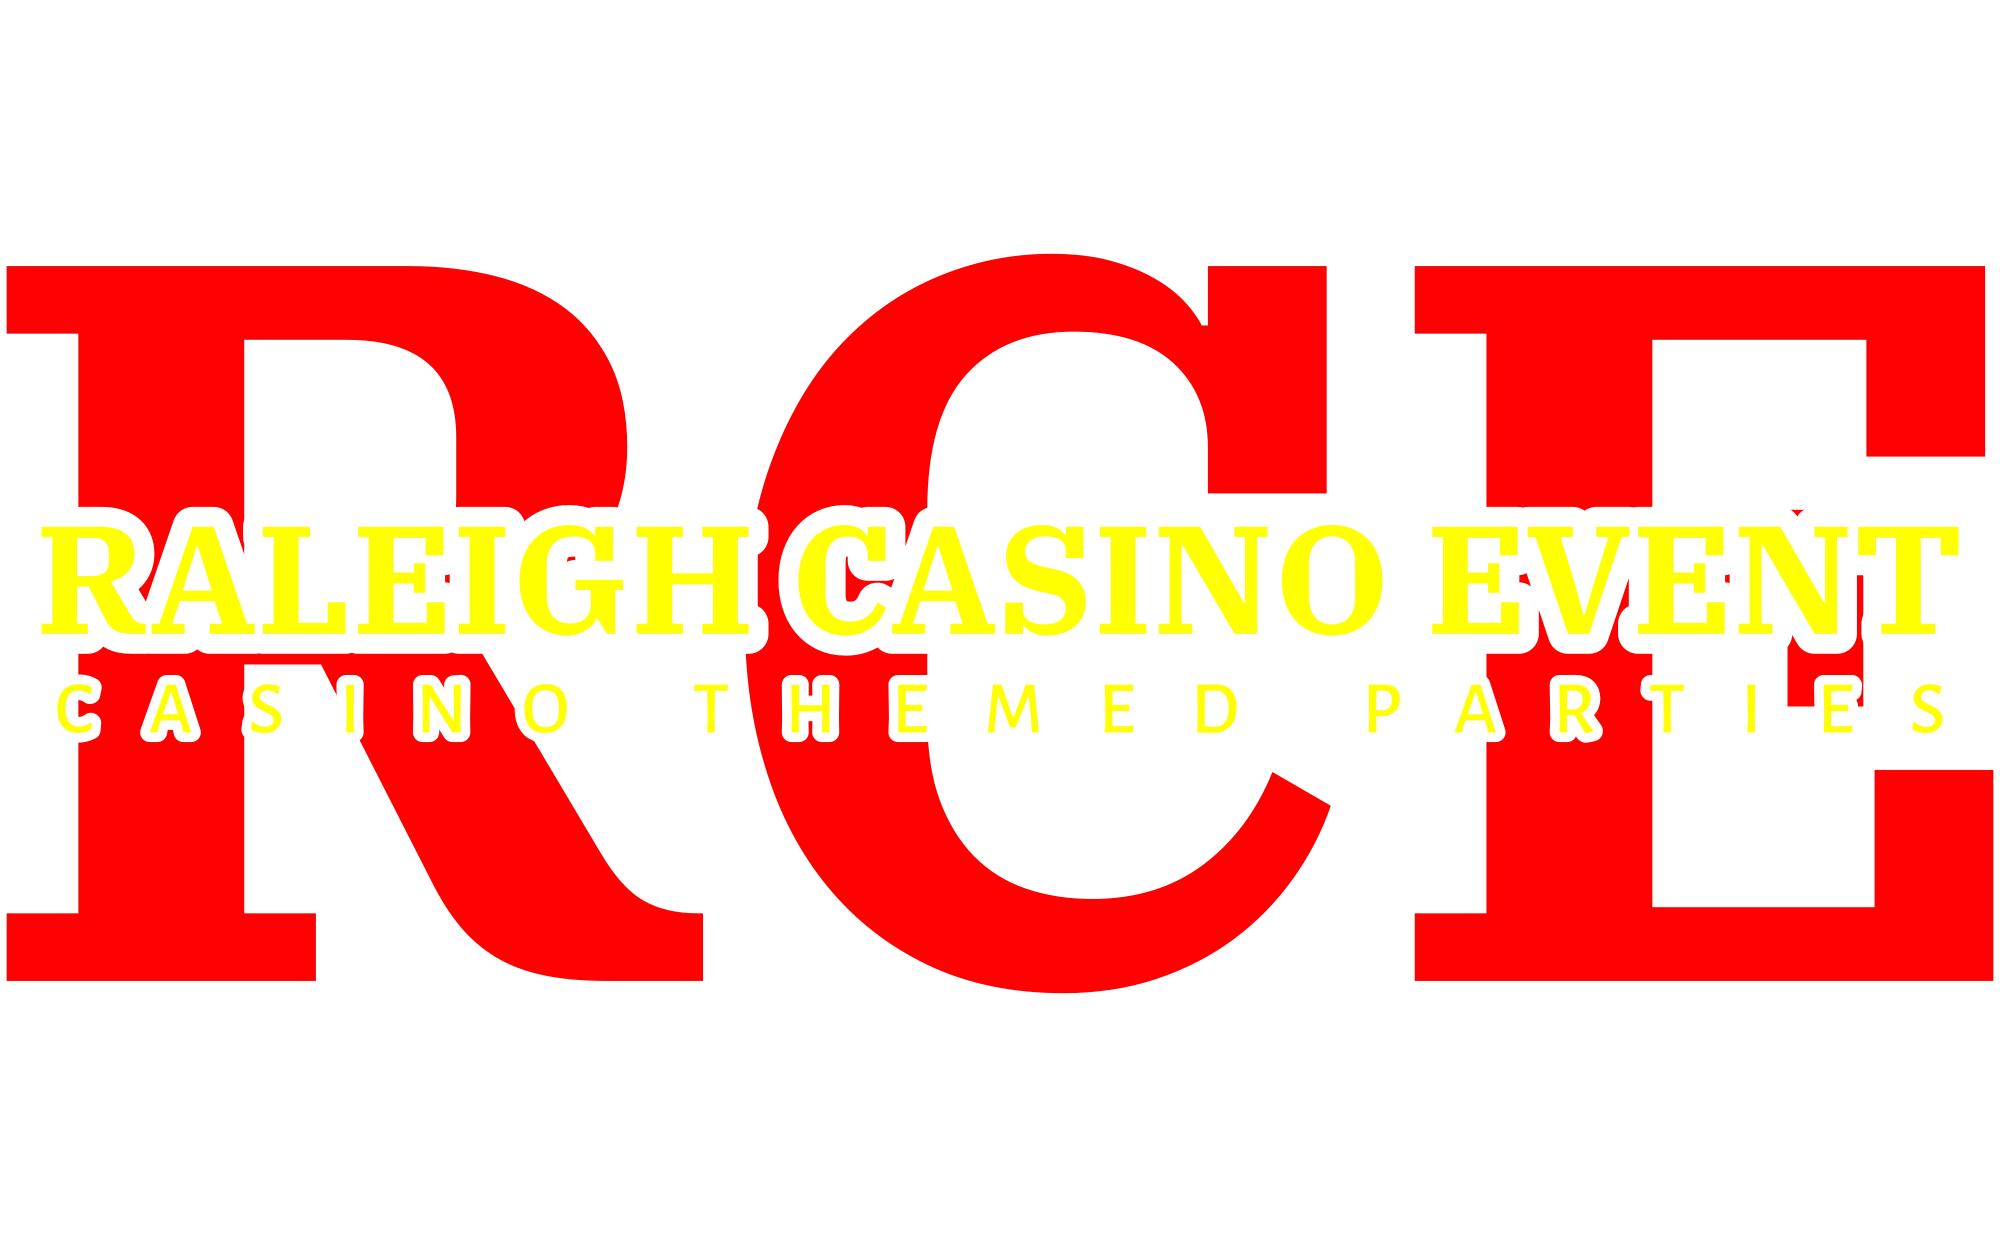 Raleigh Casino Event in North Carolina logo in red and yellow.